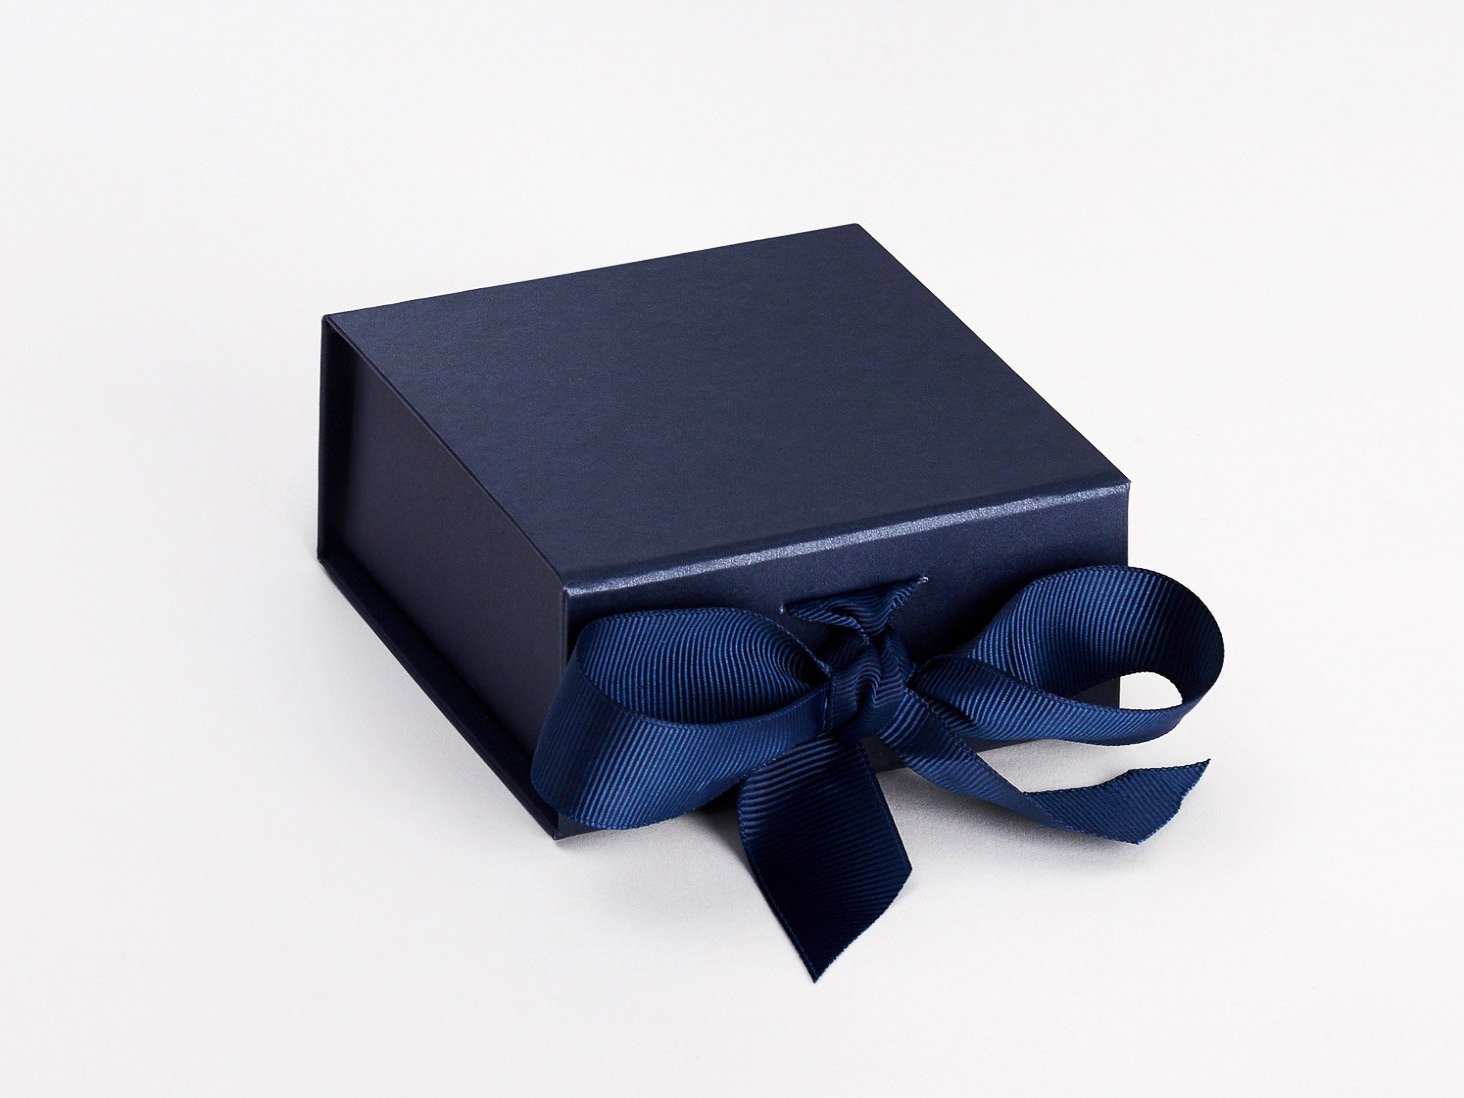 Small Navy Blue Gift Box Ideal for Jewelry Packaging from Foldabox USA